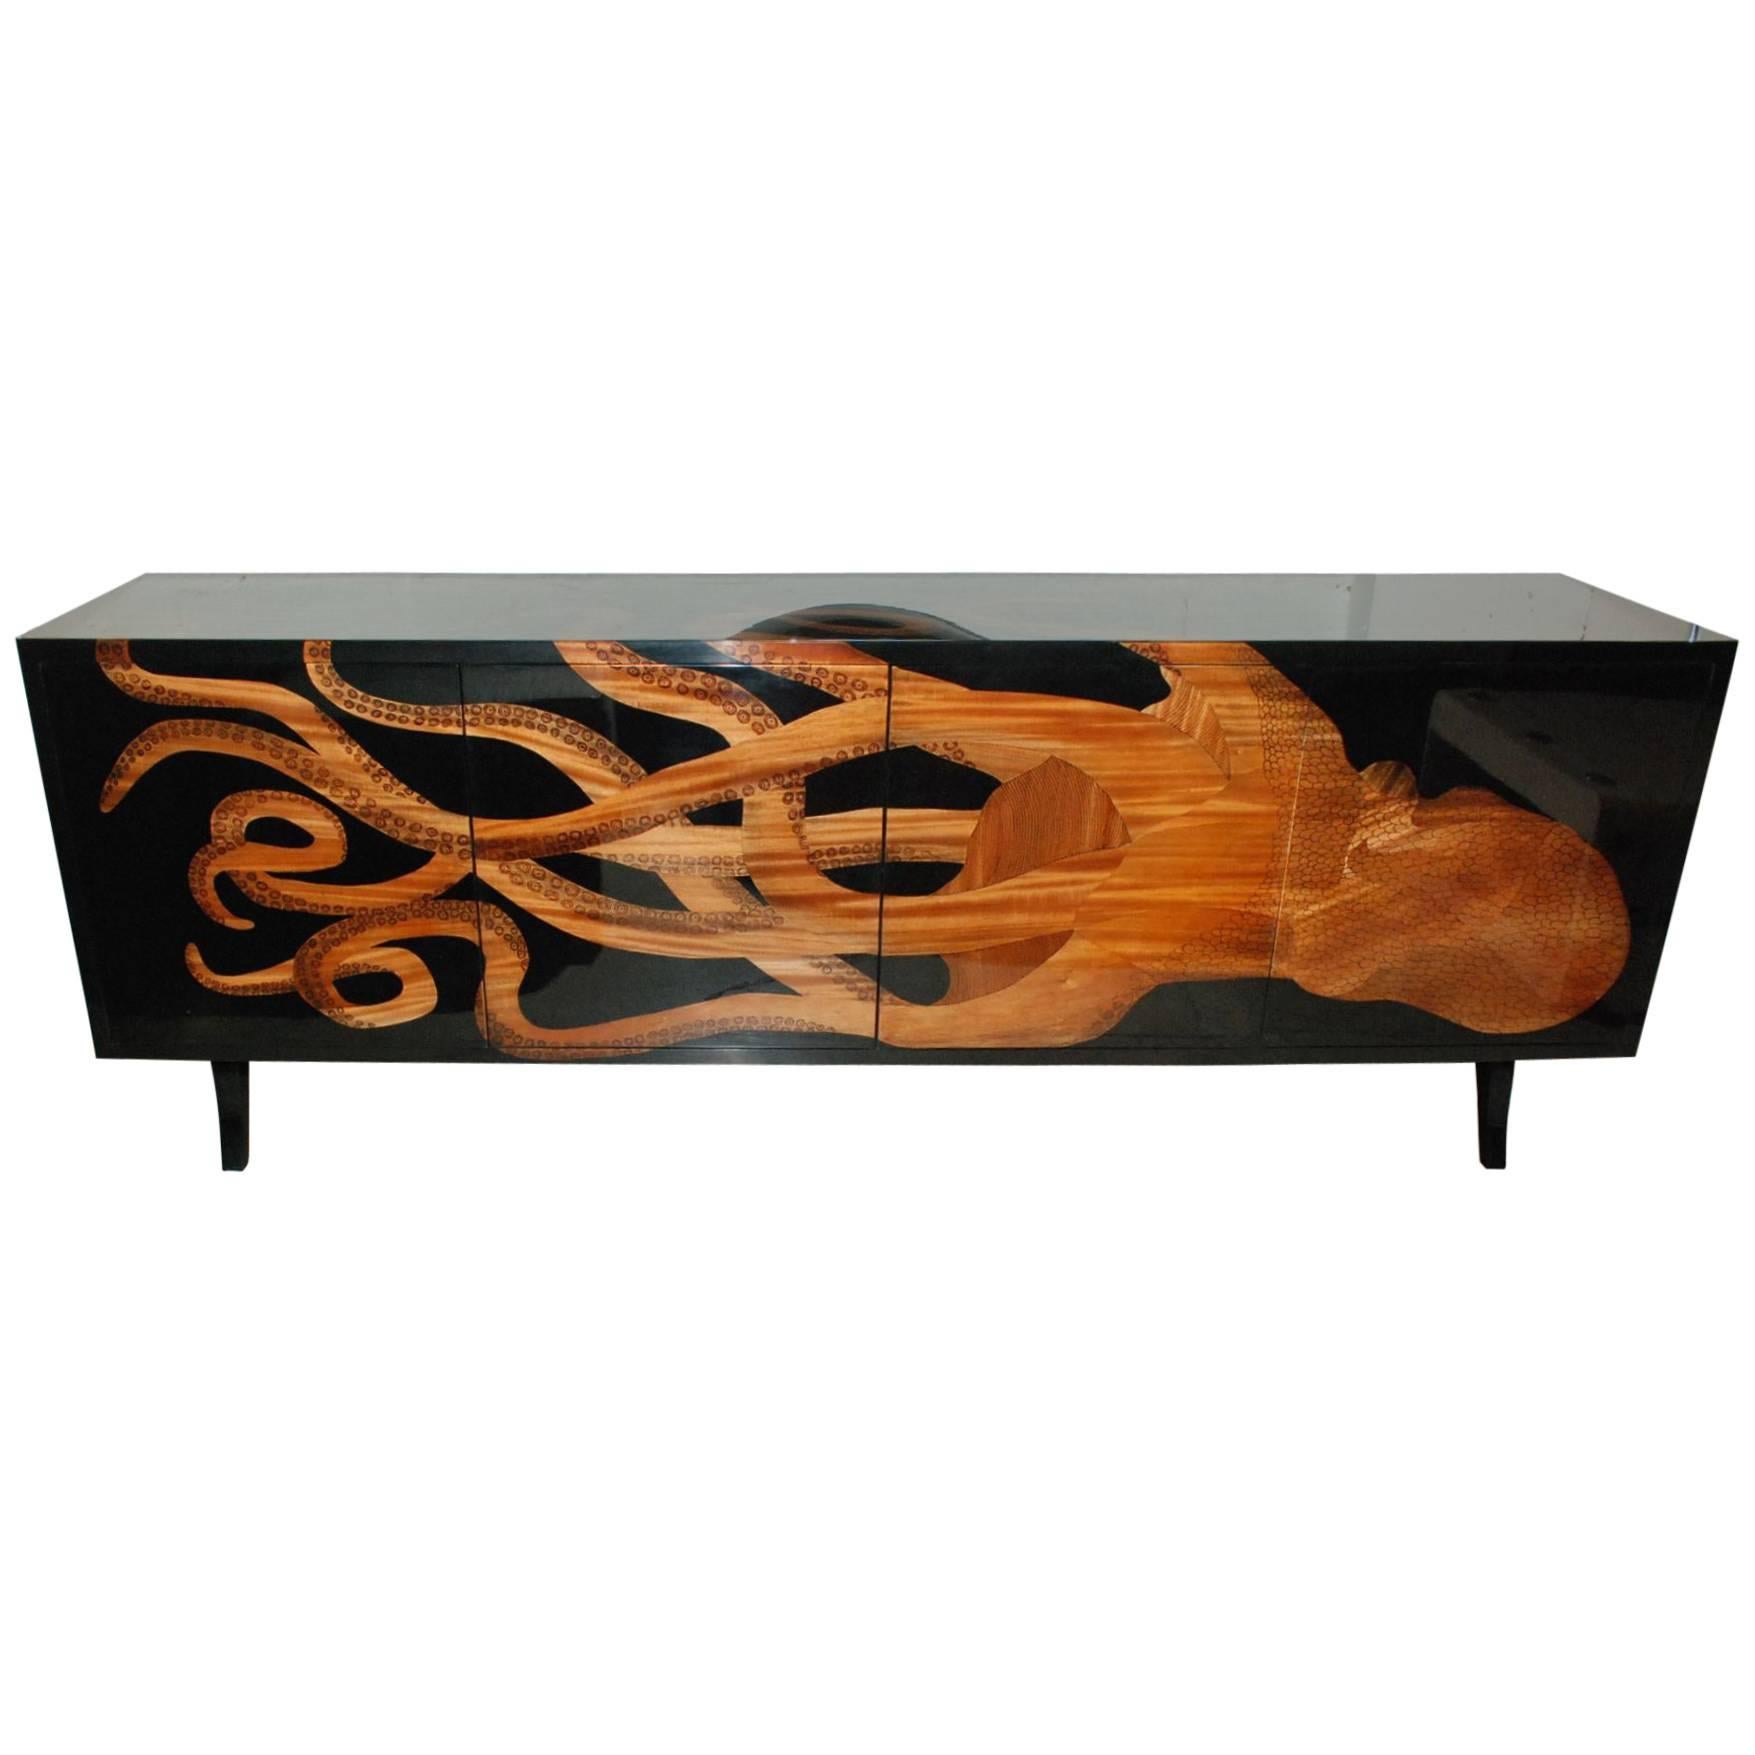 Lacquered and Wood Inlay Octopus Design Credenza